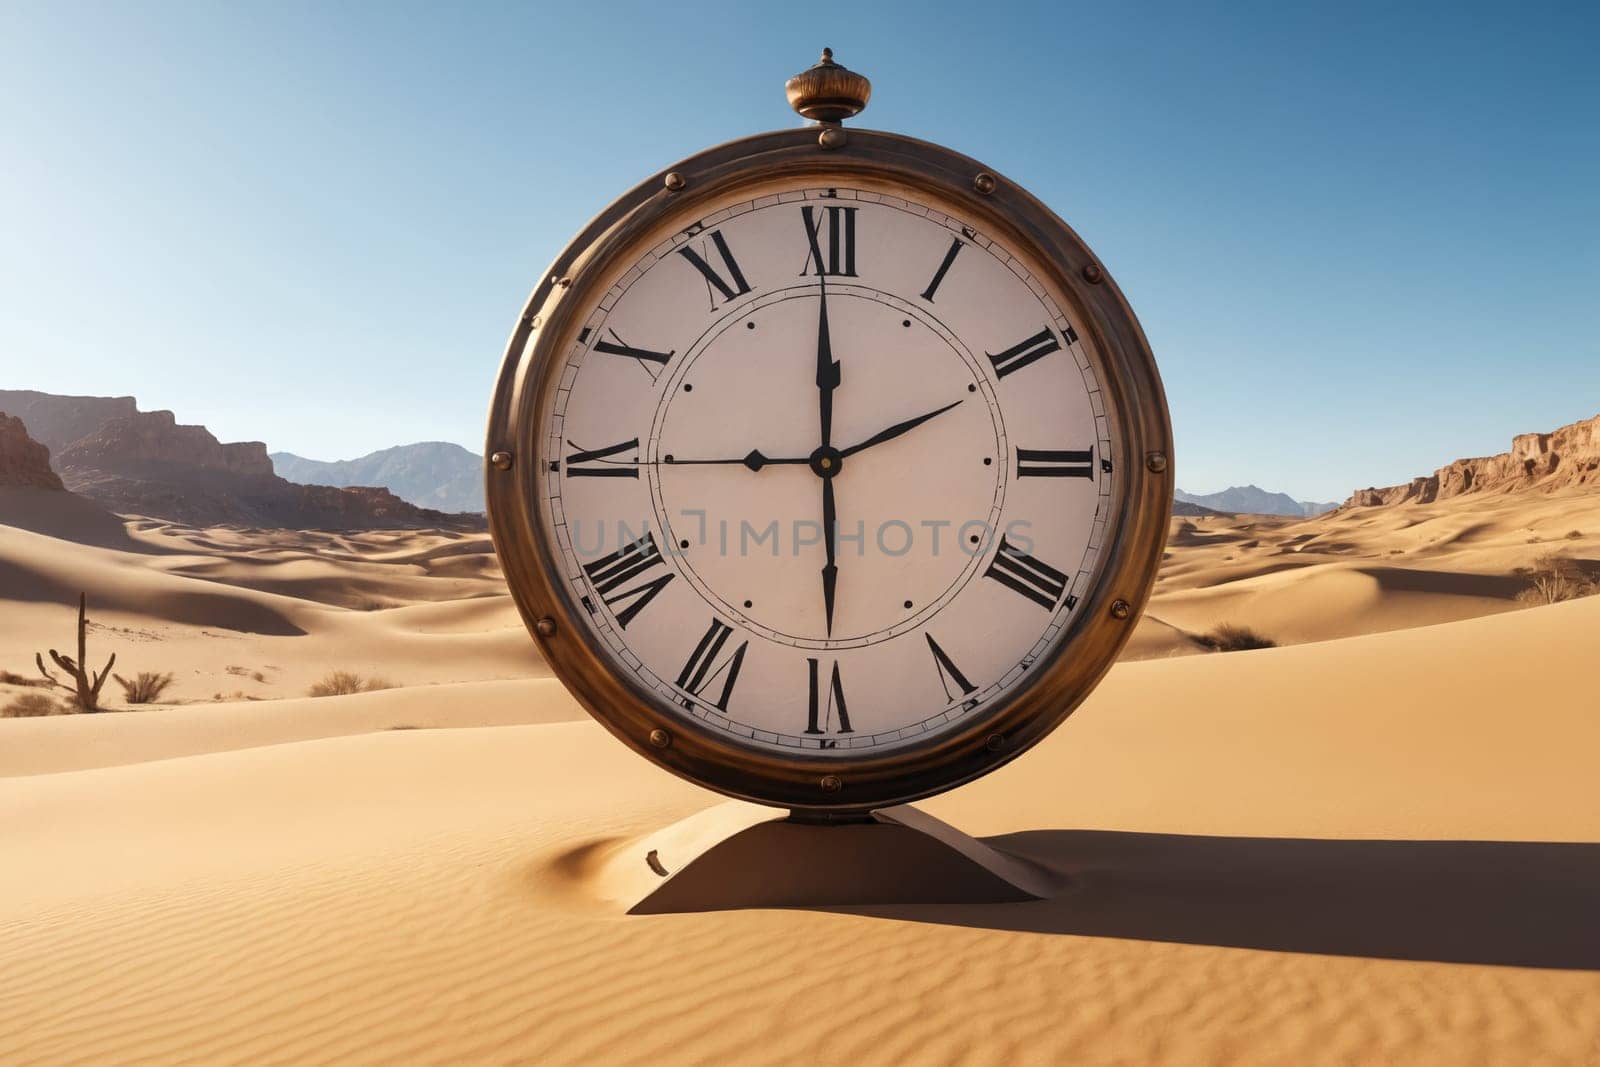 A photo art piece where the stark desert landscape merges with the transcendental clock face.